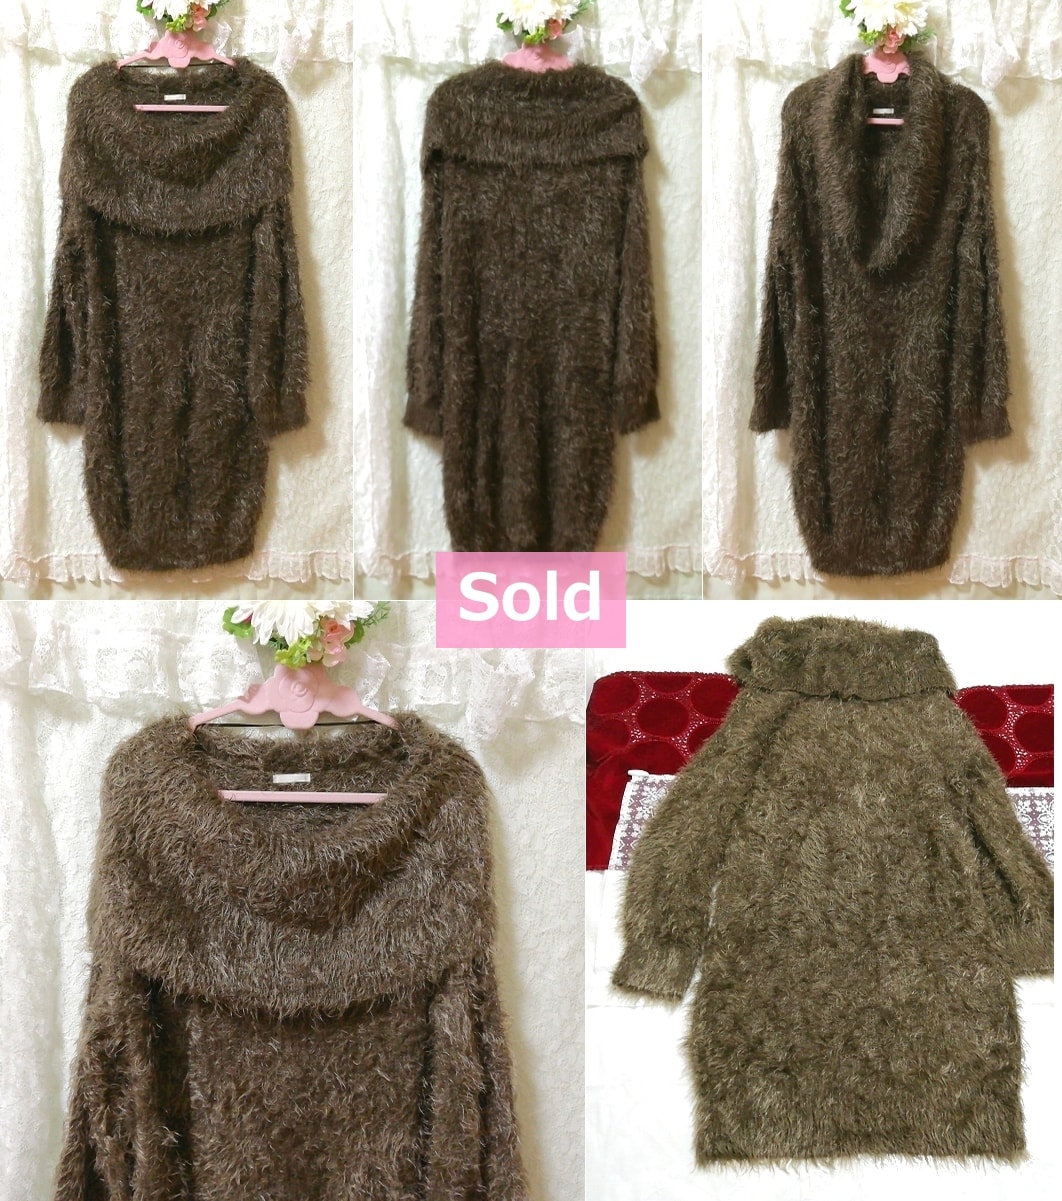 Dark green olive green fluffy long onepiece knit sweater